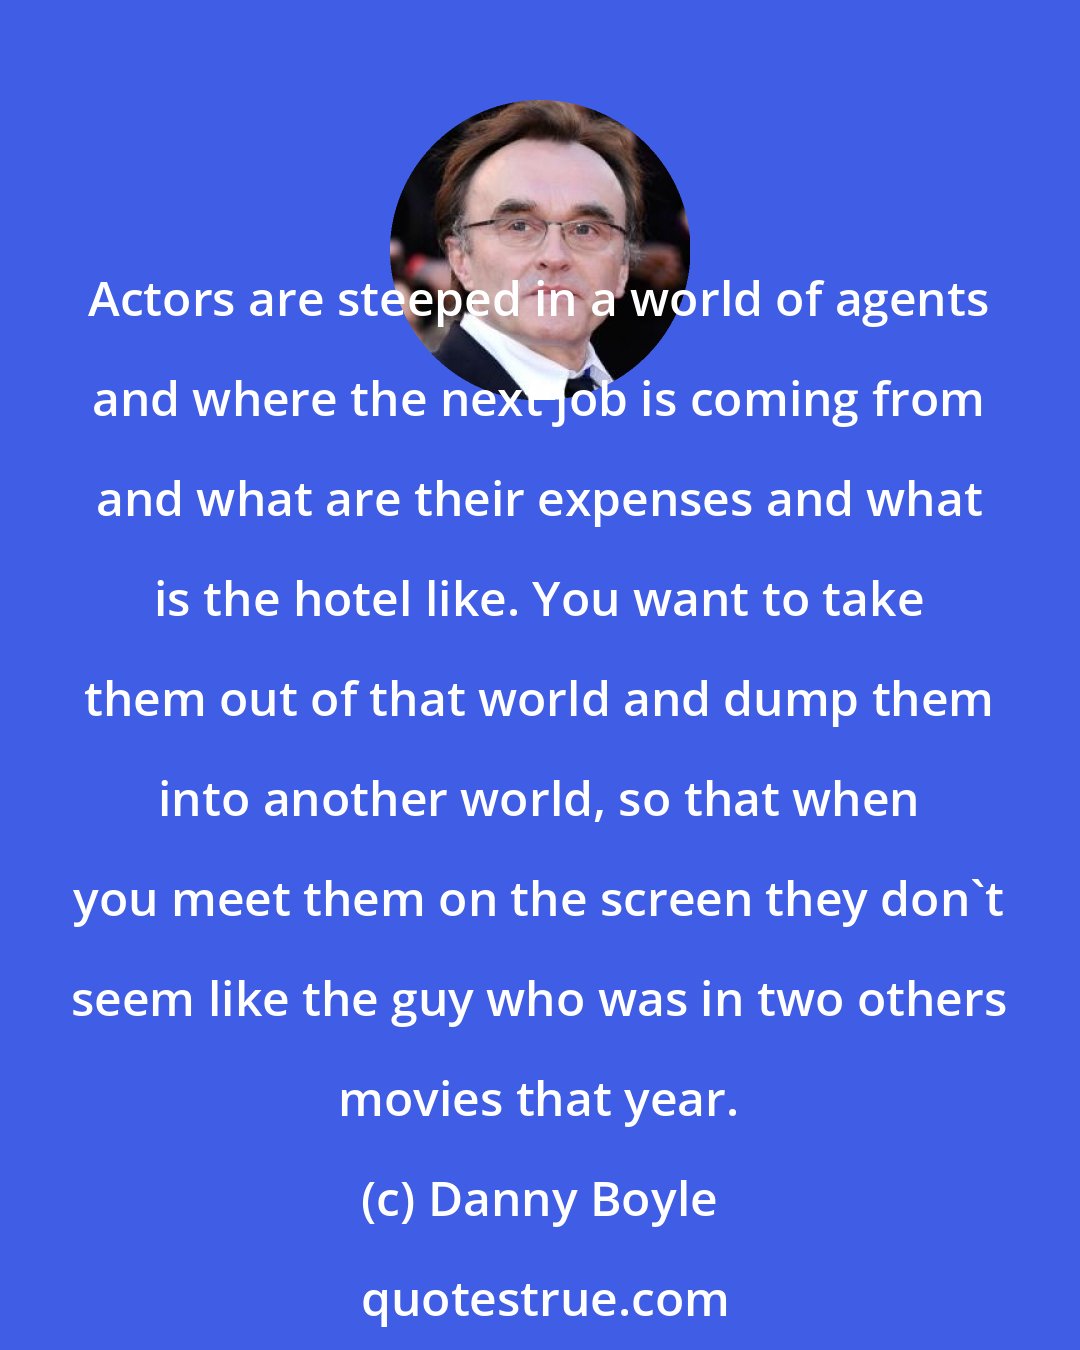 Danny Boyle: Actors are steeped in a world of agents and where the next job is coming from and what are their expenses and what is the hotel like. You want to take them out of that world and dump them into another world, so that when you meet them on the screen they don't seem like the guy who was in two others movies that year.